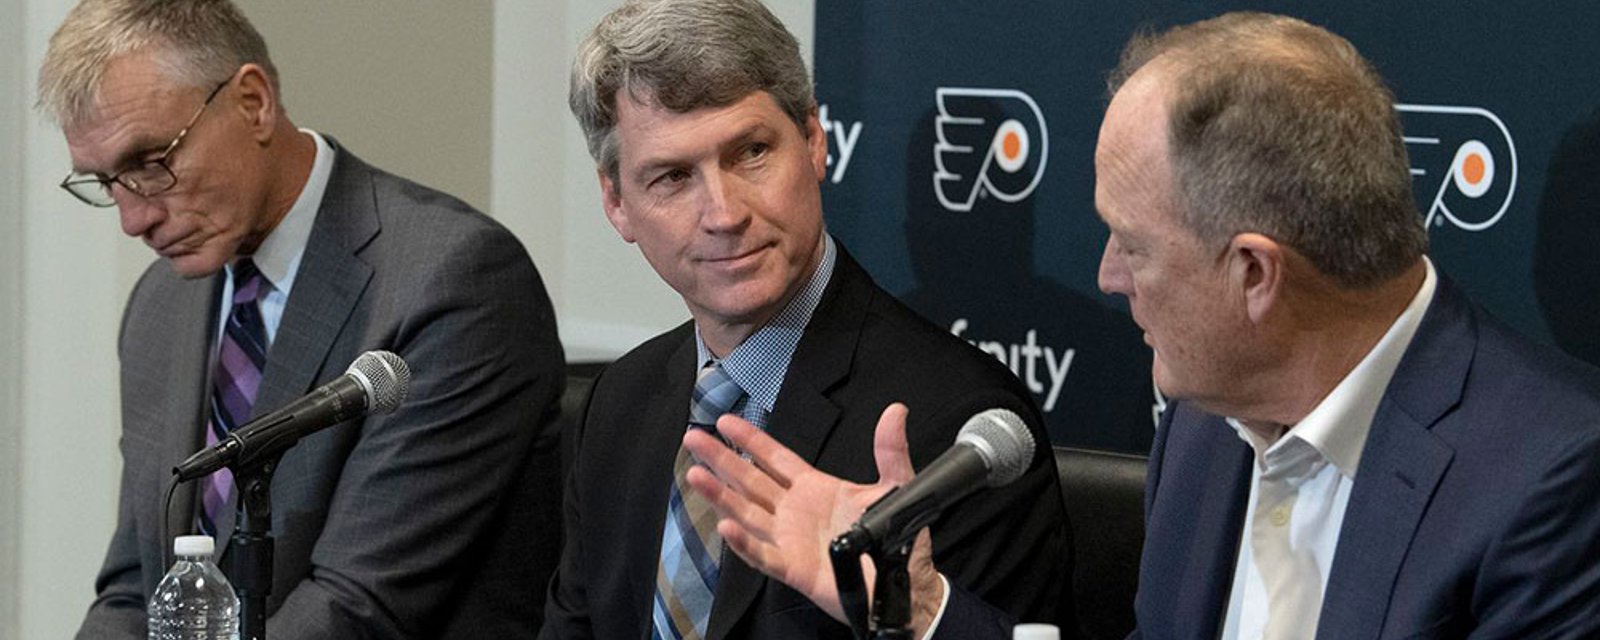 Flyers file formal complaint and meet with NHL regarding unfair scheduling